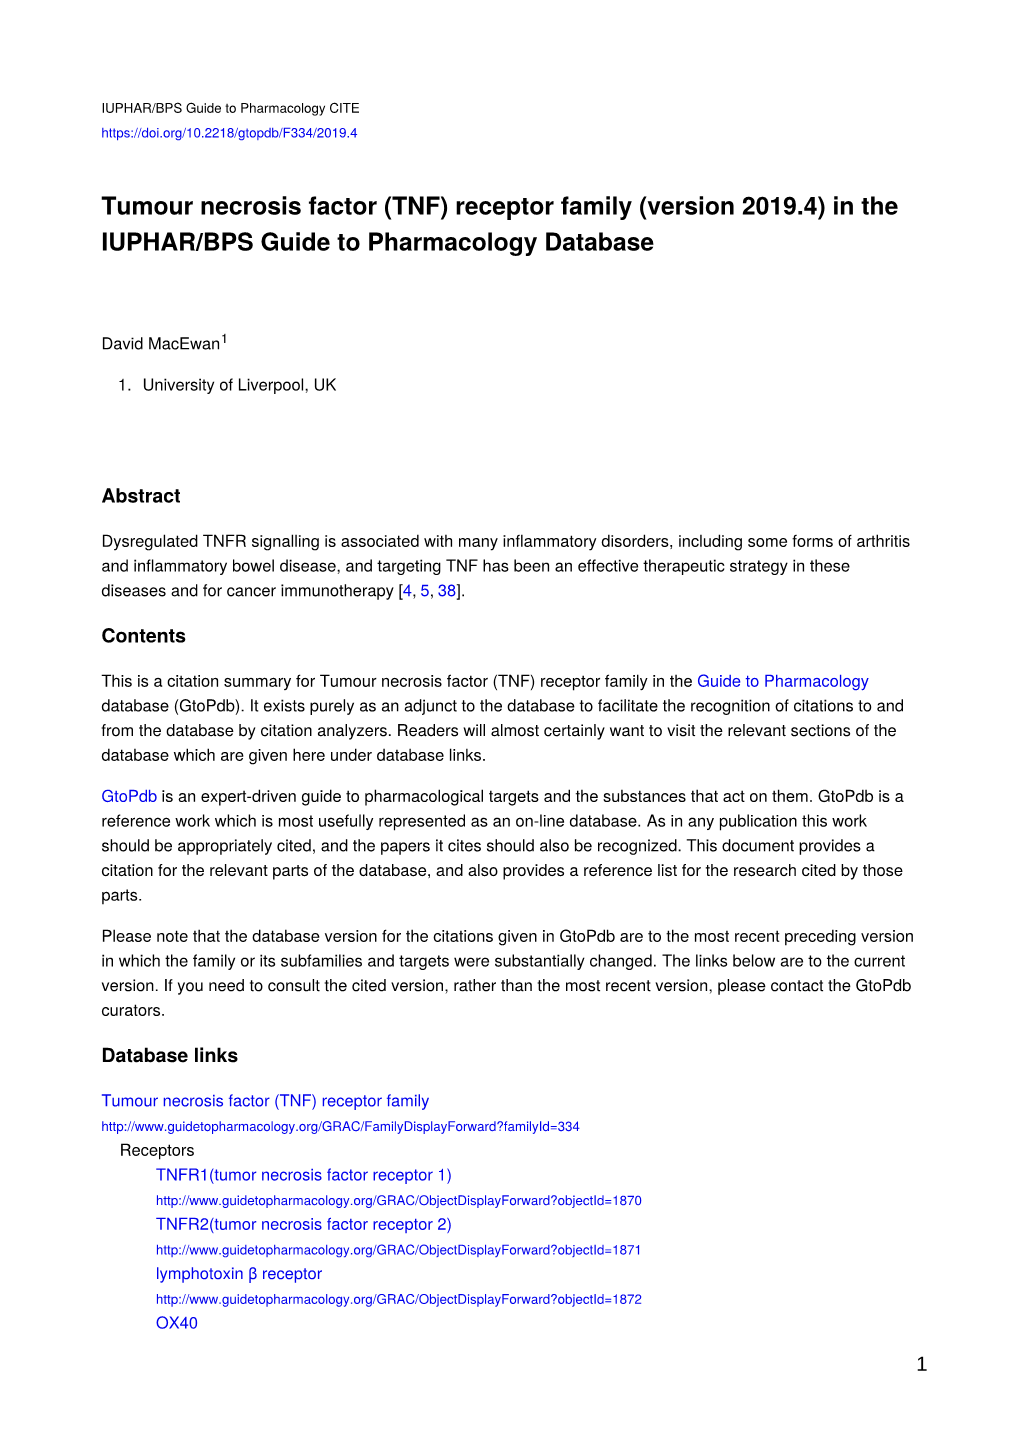 Tumour Necrosis Factor (TNF) Receptor Family (Version 2019.4) in the IUPHAR/BPS Guide to Pharmacology Database